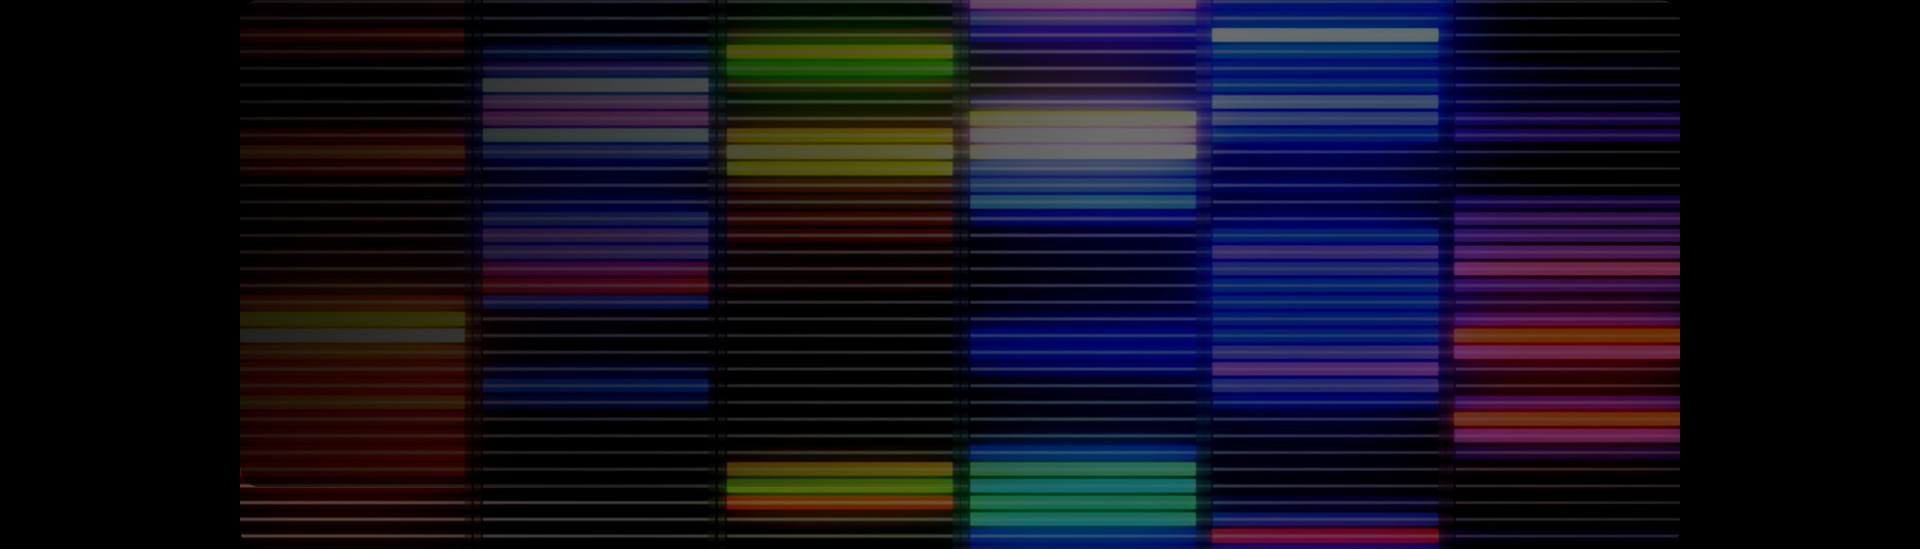 There are neon-colored square bars stacked up in 6 columns.